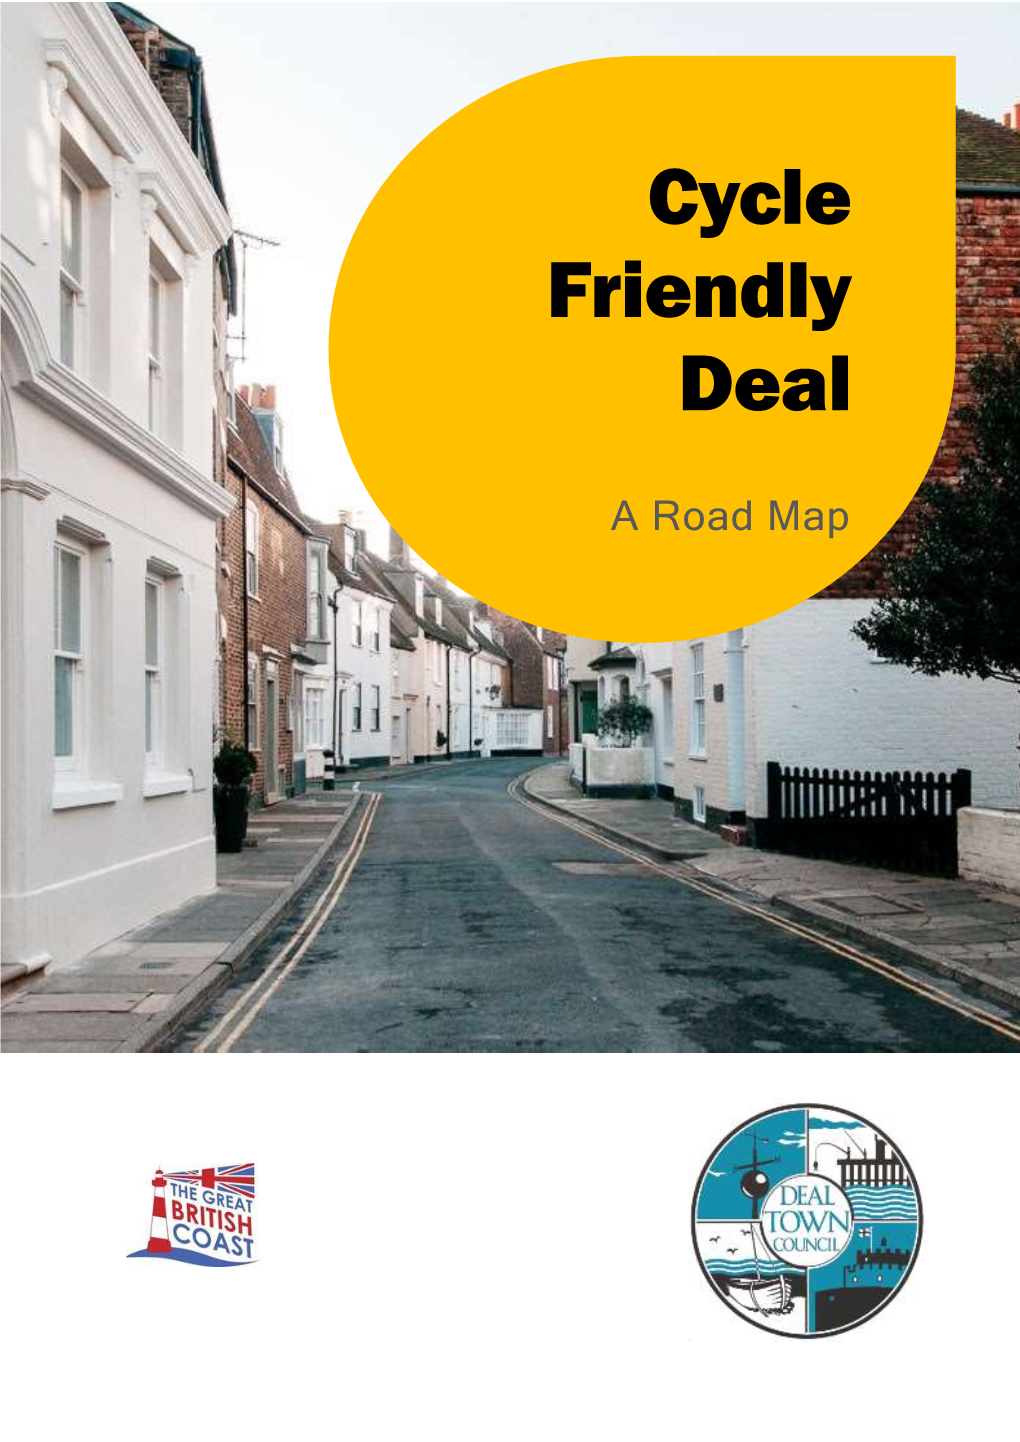 Cycle Friendly Deal Road Map Is a Working Document That Will Evolve As the Project Develops